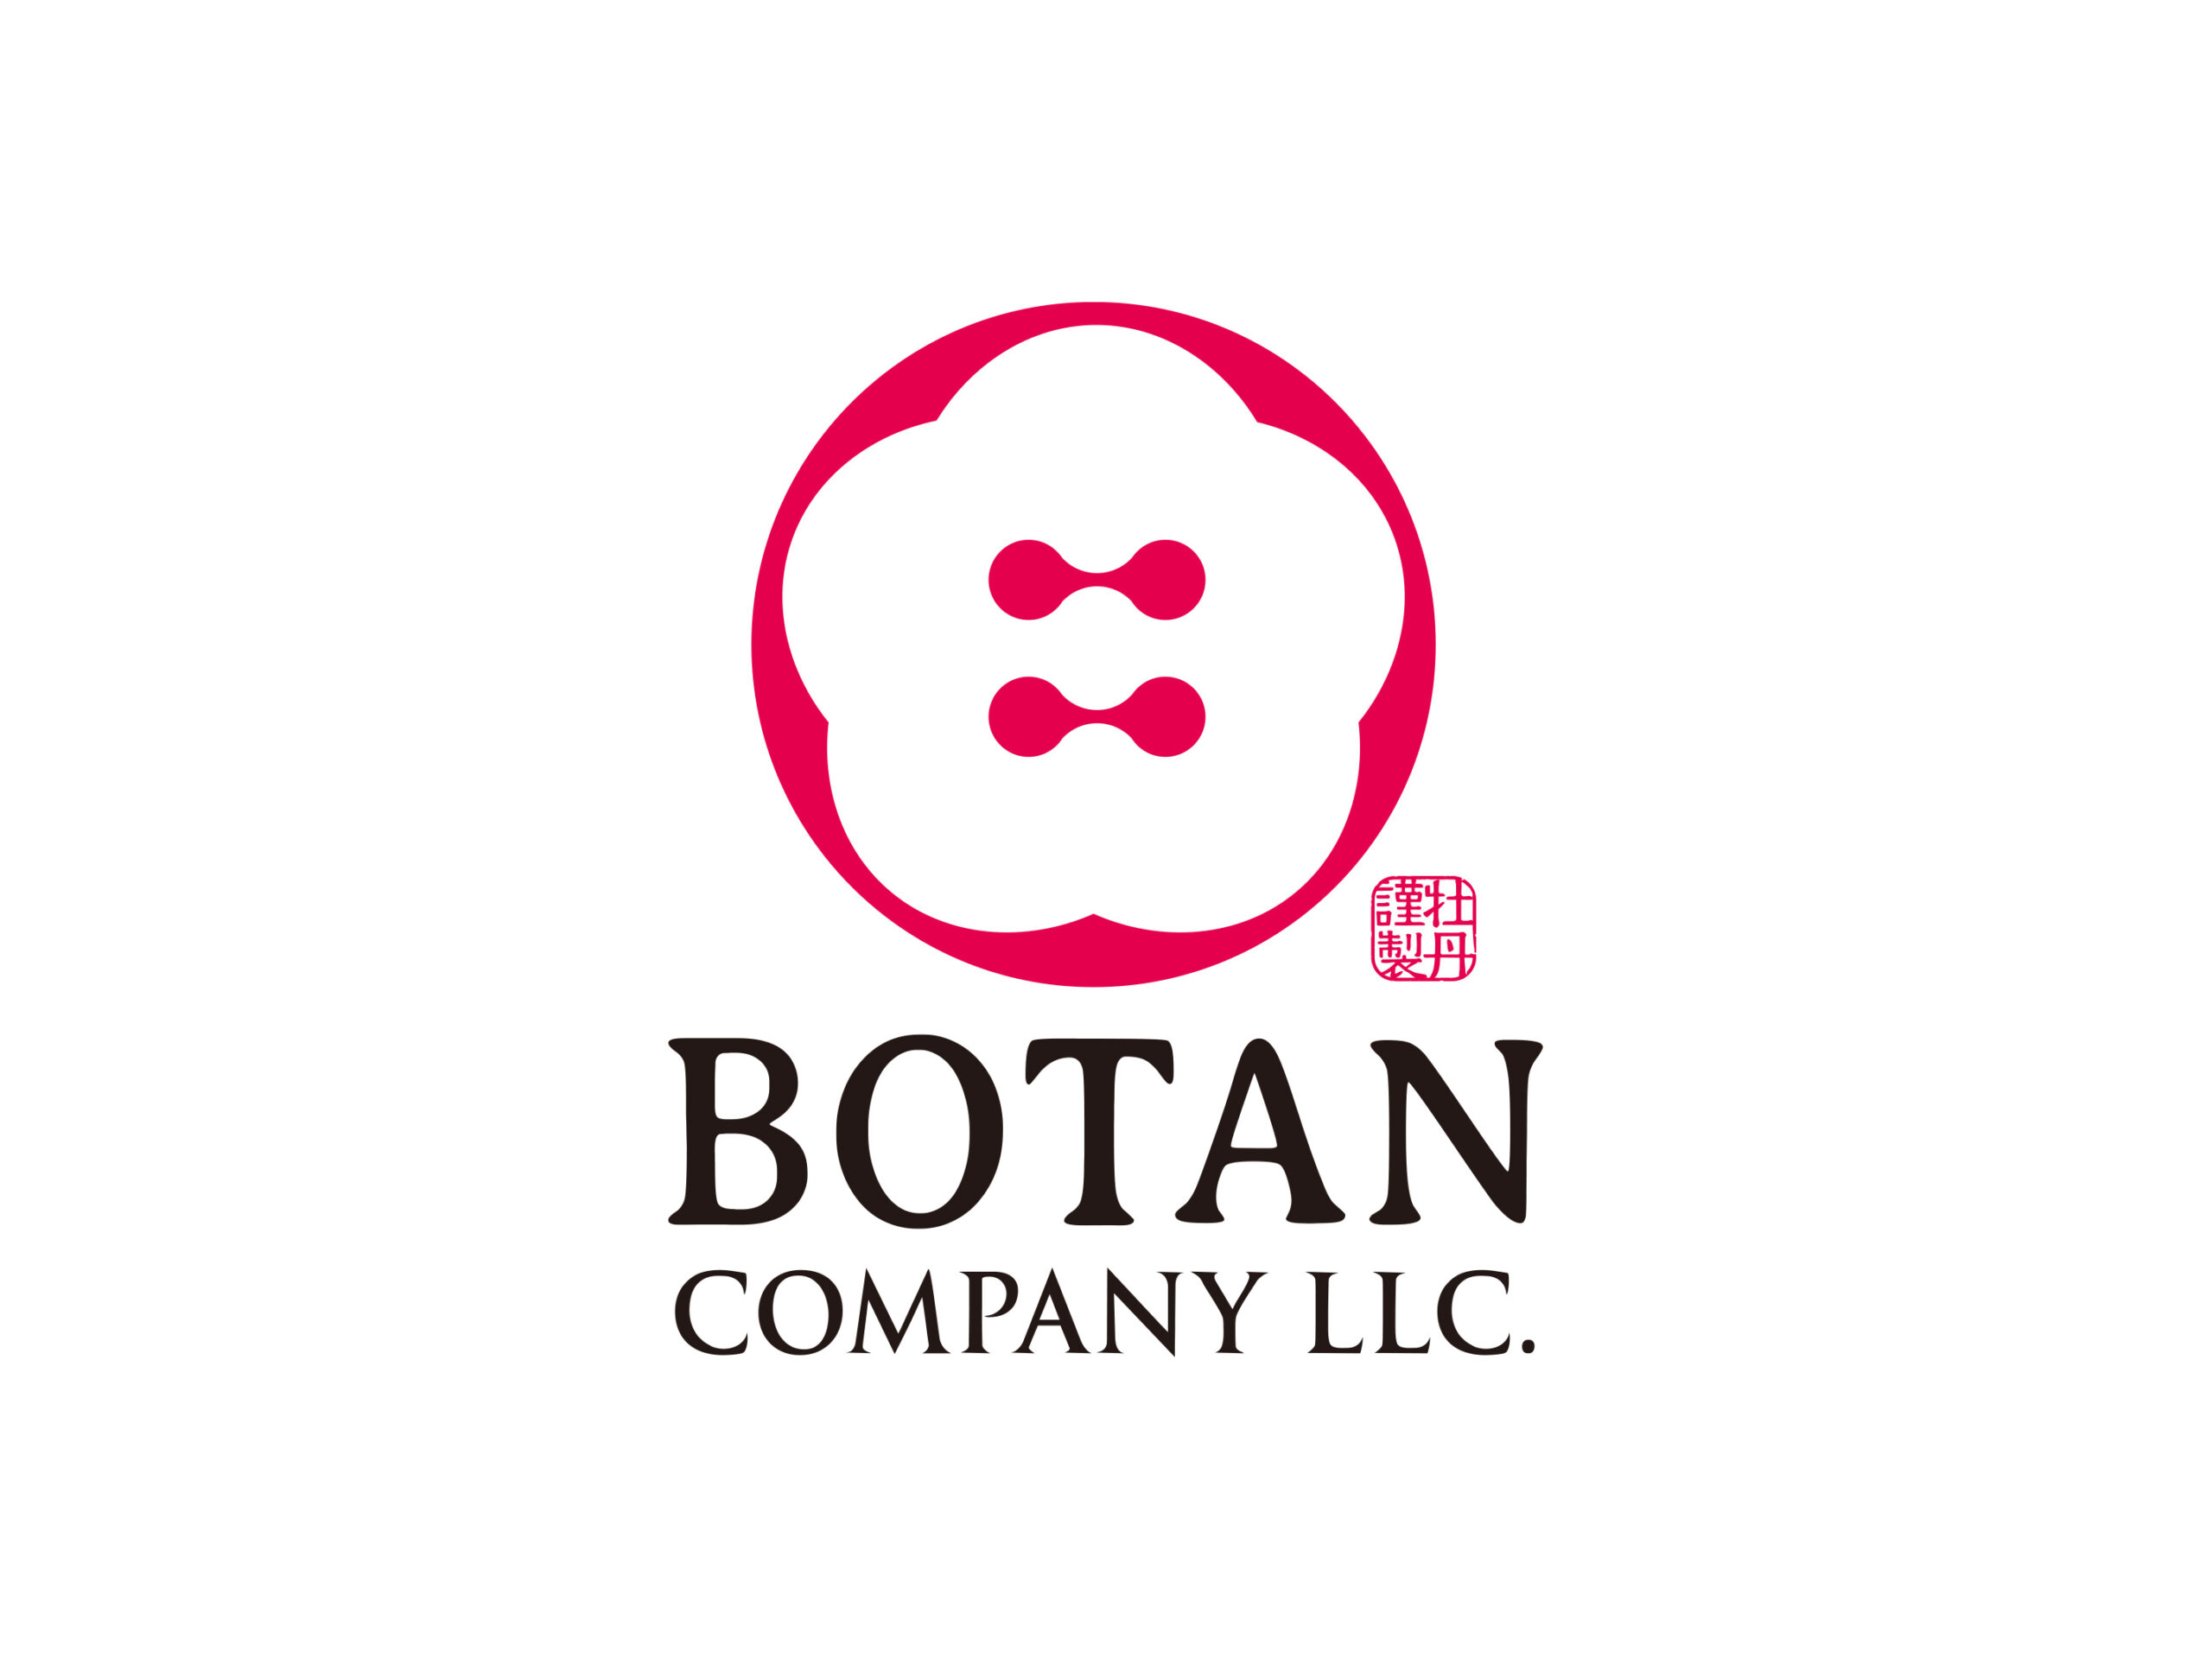 Our New Family  “Botan”  long expected new cannabis brand.